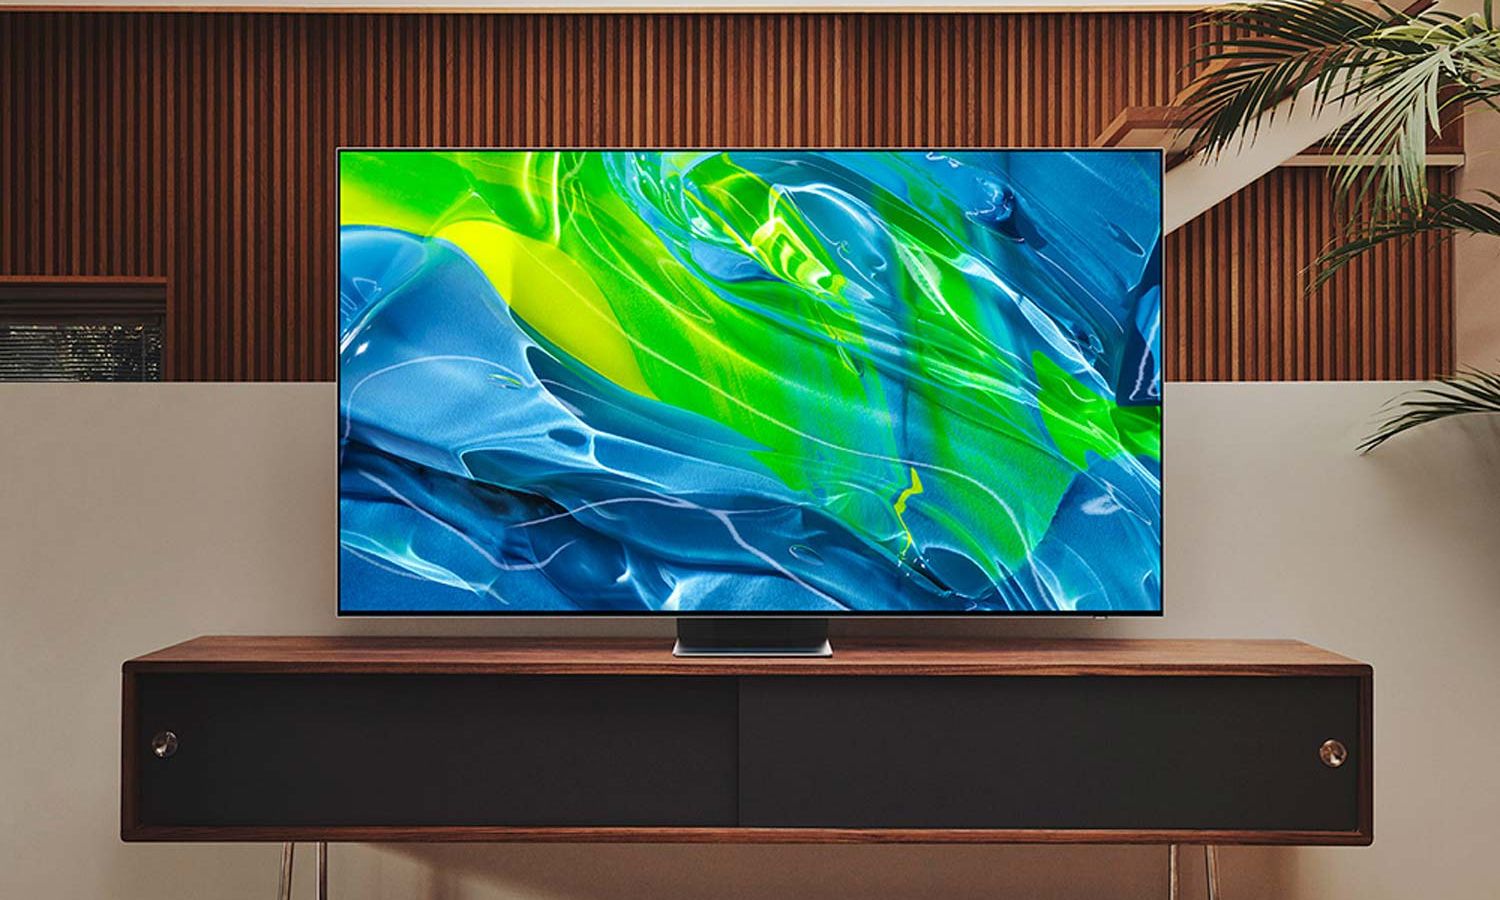 Samsung TV in a modern black and wood furniture